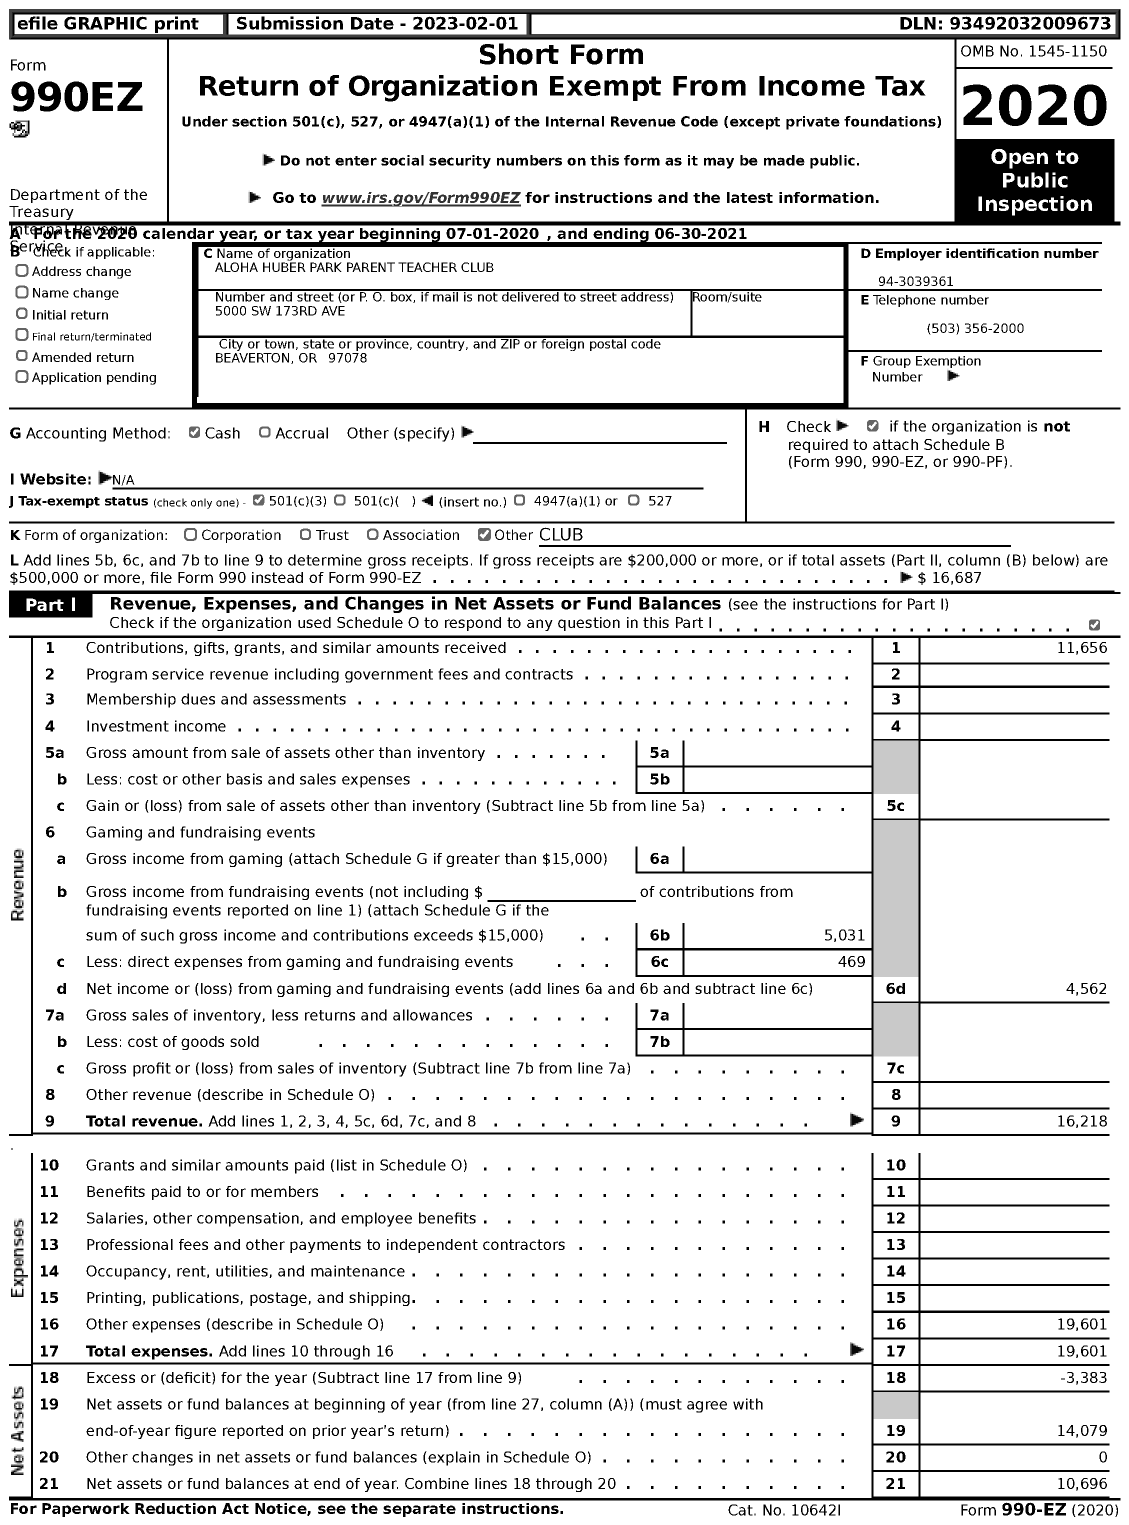 Image of first page of 2020 Form 990EZ for Aloha Huber Park Parent Teacher Club